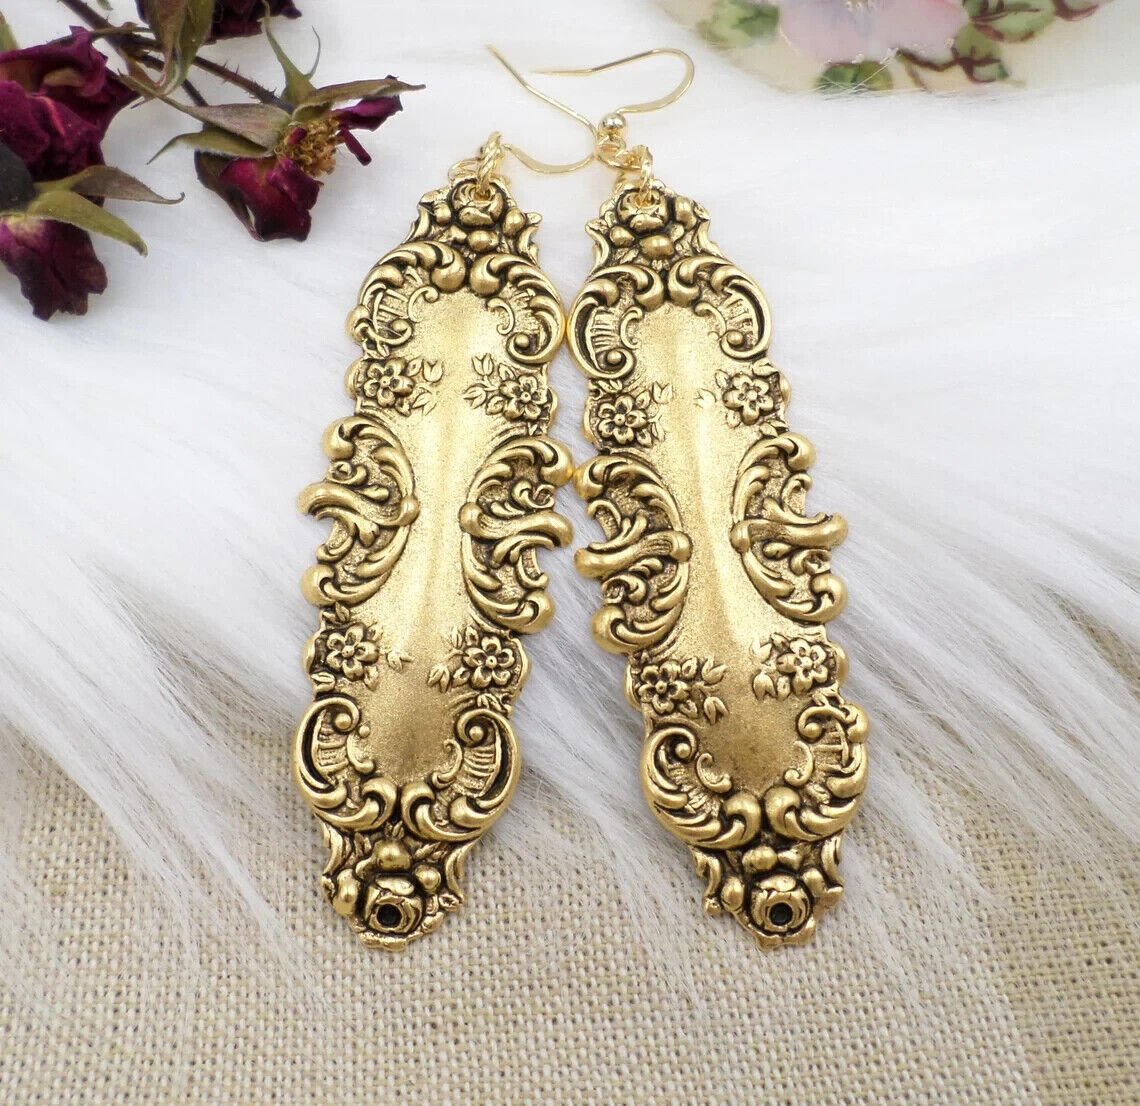 BIG Antique Gold Plated Brass Victorian Style Filigree Floral Earrings